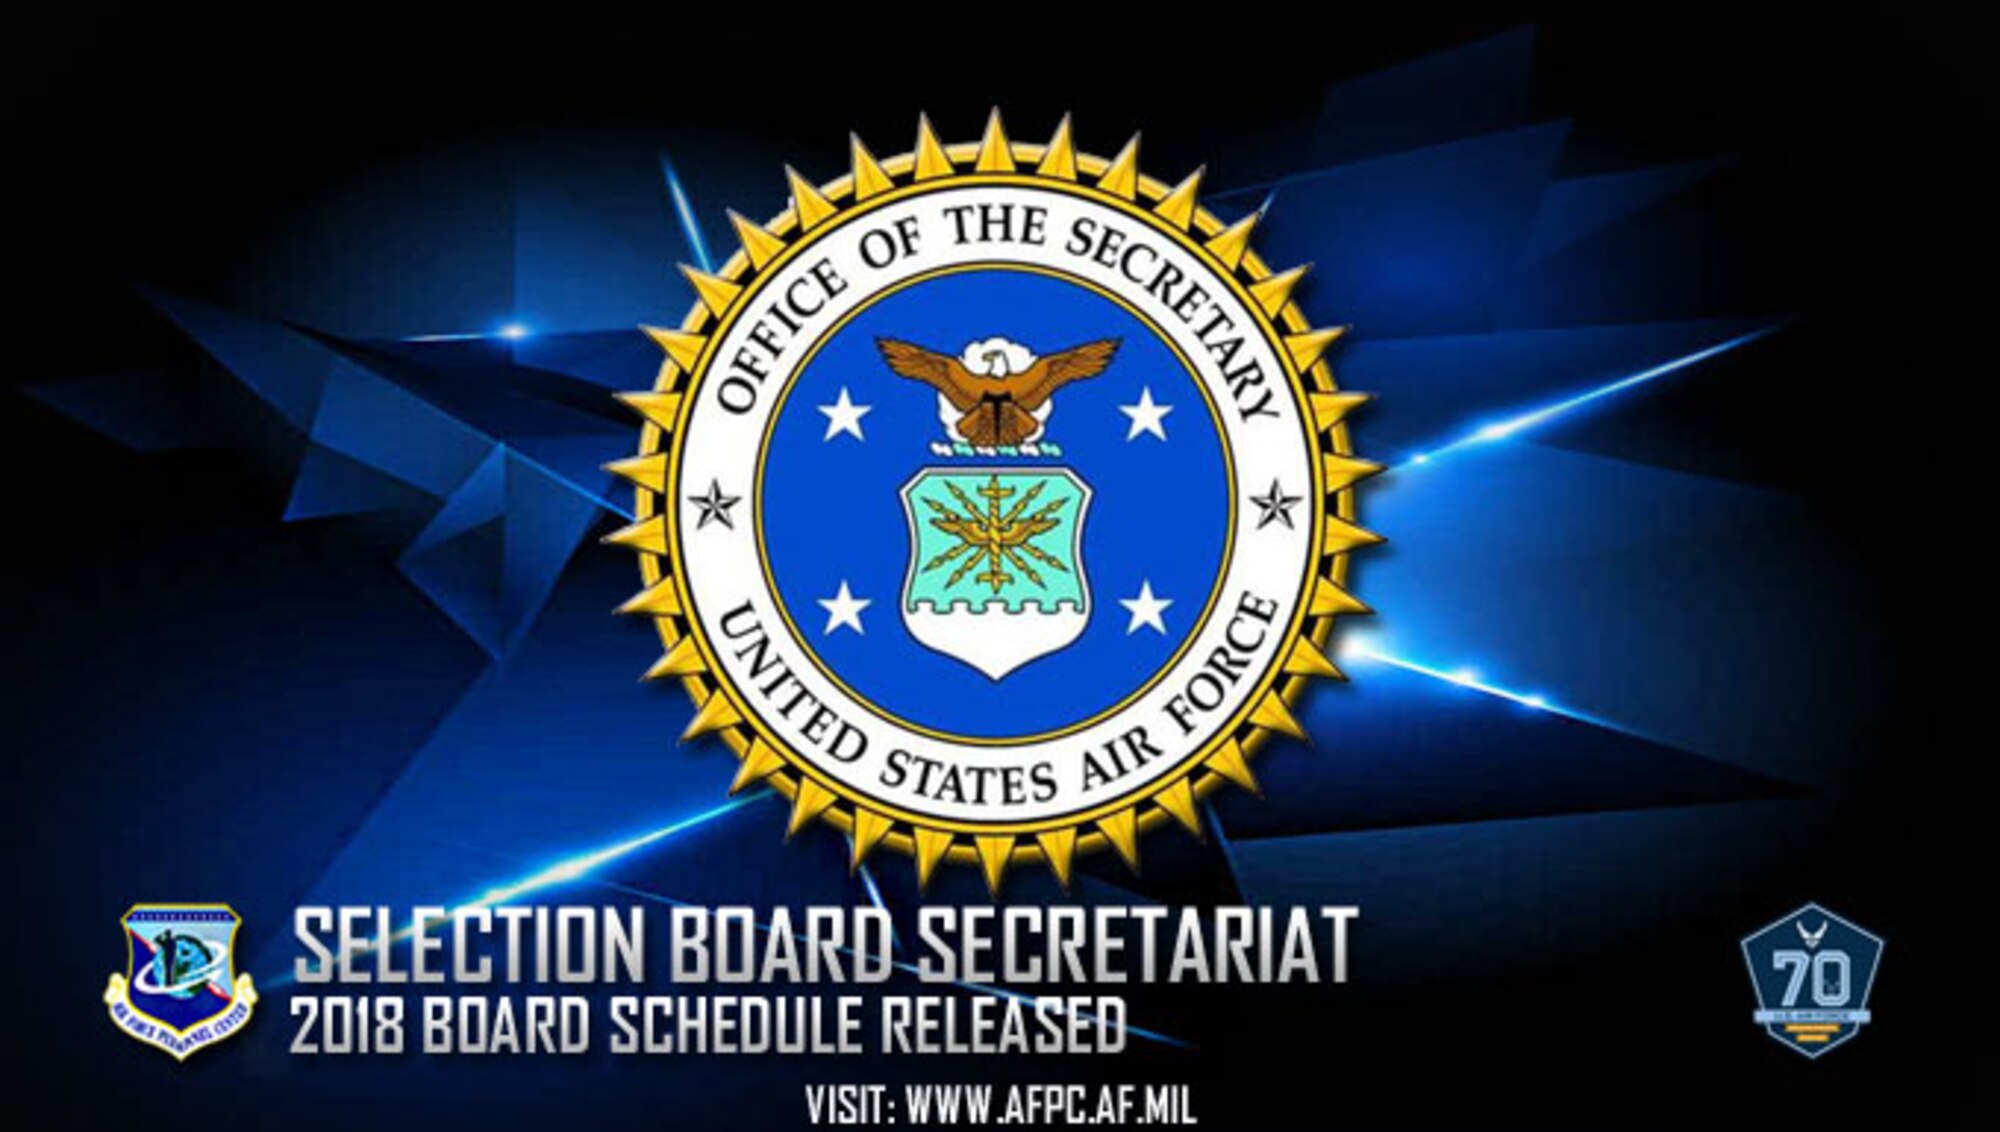 The Air Force Selection Board Secretariat conducts about 140 boards per year, including all general officer promotion and federal recognition boards; officer promotion, continuation and force management boards; master, senior master and chief master sergeant enlisted evaluation boards; and other boards as directed by the Secretary of the Air Force. (U. S. Air Force graphic by Staff Sgt. Alexx Pons)